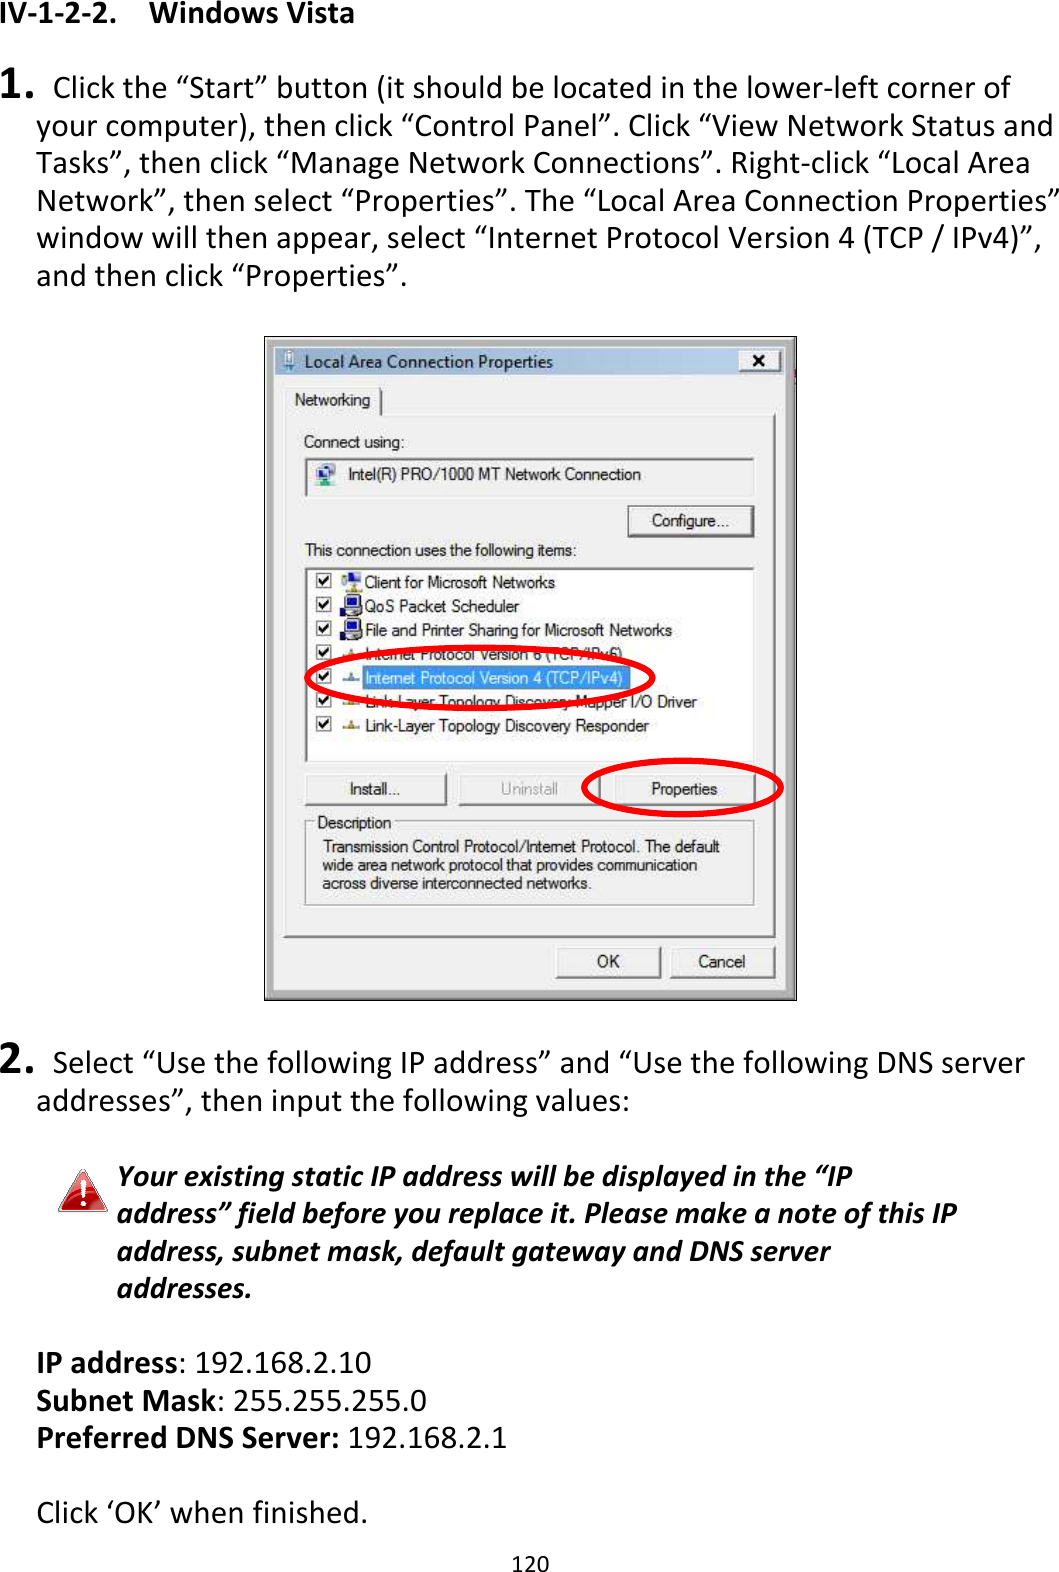 120 IV-1-2-2.  Windows Vista  1.   Click the “Start” button (it should be located in the lower-left corner of your computer), then click “Control Panel”. Click “View Network Status and Tasks”, then click “Manage Network Connections”. Right-click “Local Area Network”, then select “Properties”. The “Local Area Connection Properties” window will then appear, select “Internet Protocol Version 4 (TCP / IPv4)”, and then click “Properties”.    2.   Select “Use the following IP address” and “Use the following DNS server addresses”, then input the following values:  Your existing static IP address will be displayed in the “IP address” field before you replace it. Please make a note of this IP address, subnet mask, default gateway and DNS server addresses.  IP address: 192.168.2.10 Subnet Mask: 255.255.255.0 Preferred DNS Server: 192.168.2.1  Click ‘OK’ when finished. 